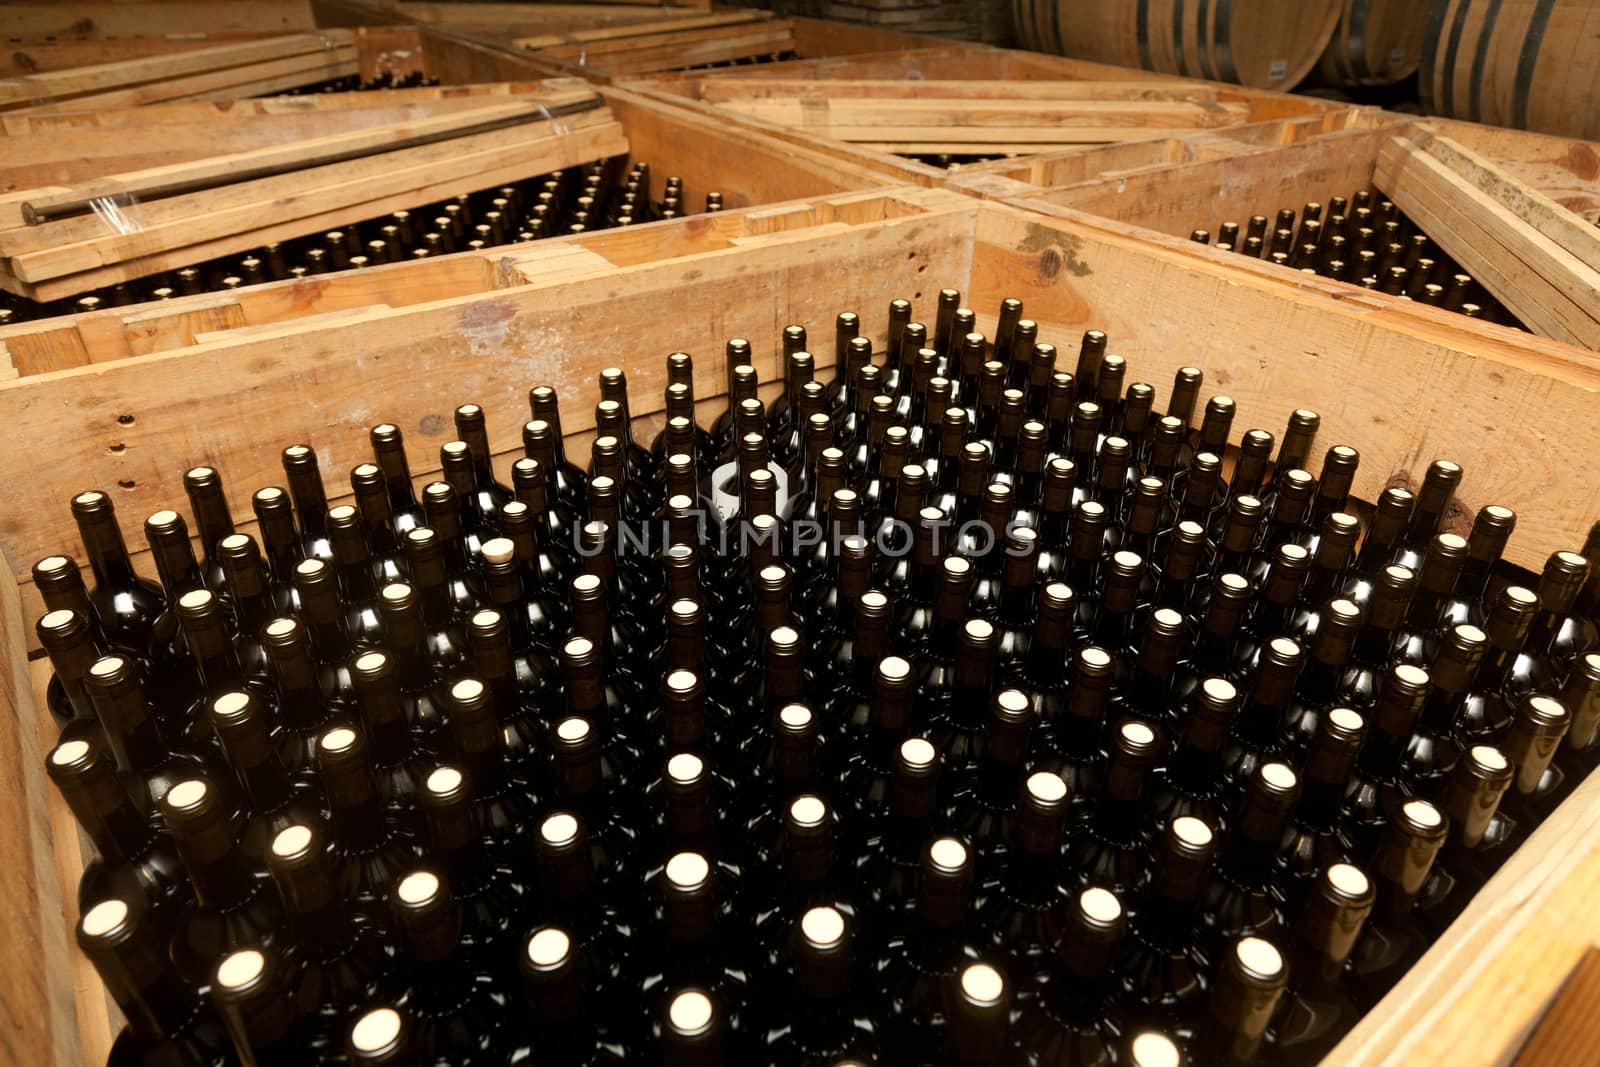 Packaged bottles of wine in large wooden crates